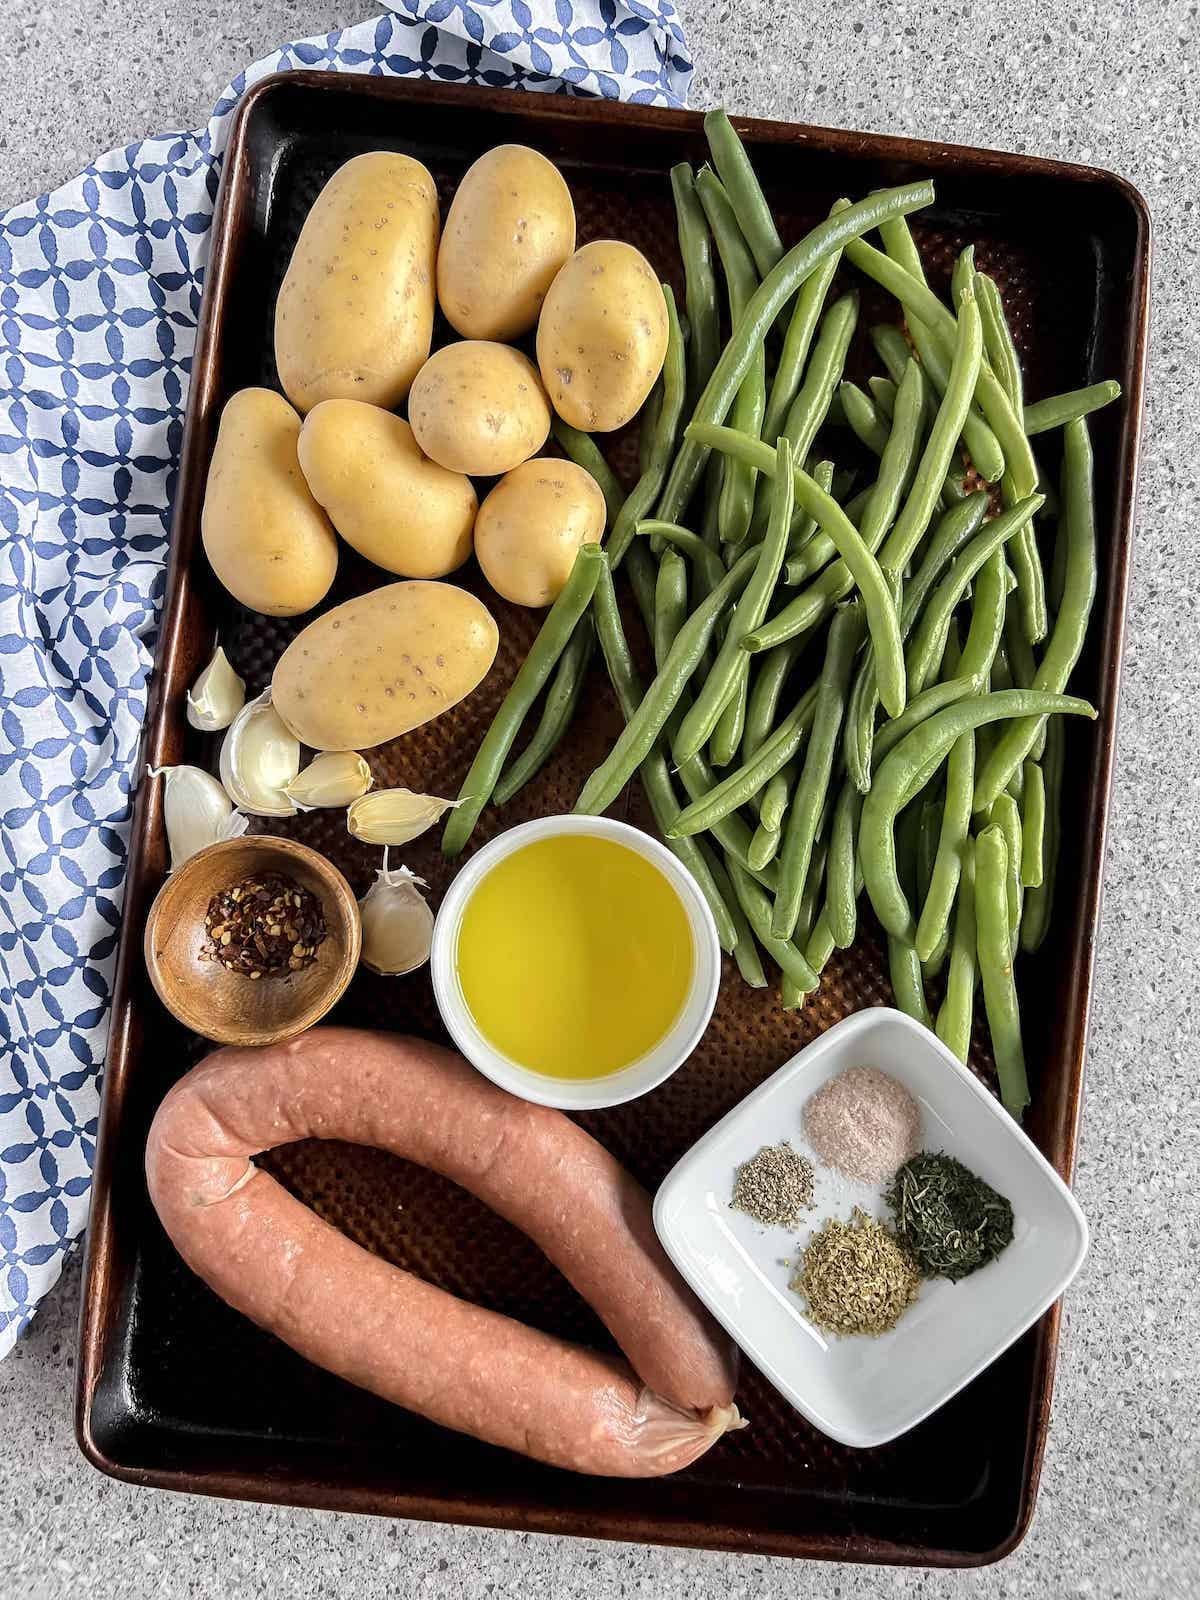 Ingredients on a sheet pan with a blue patterned napkin.